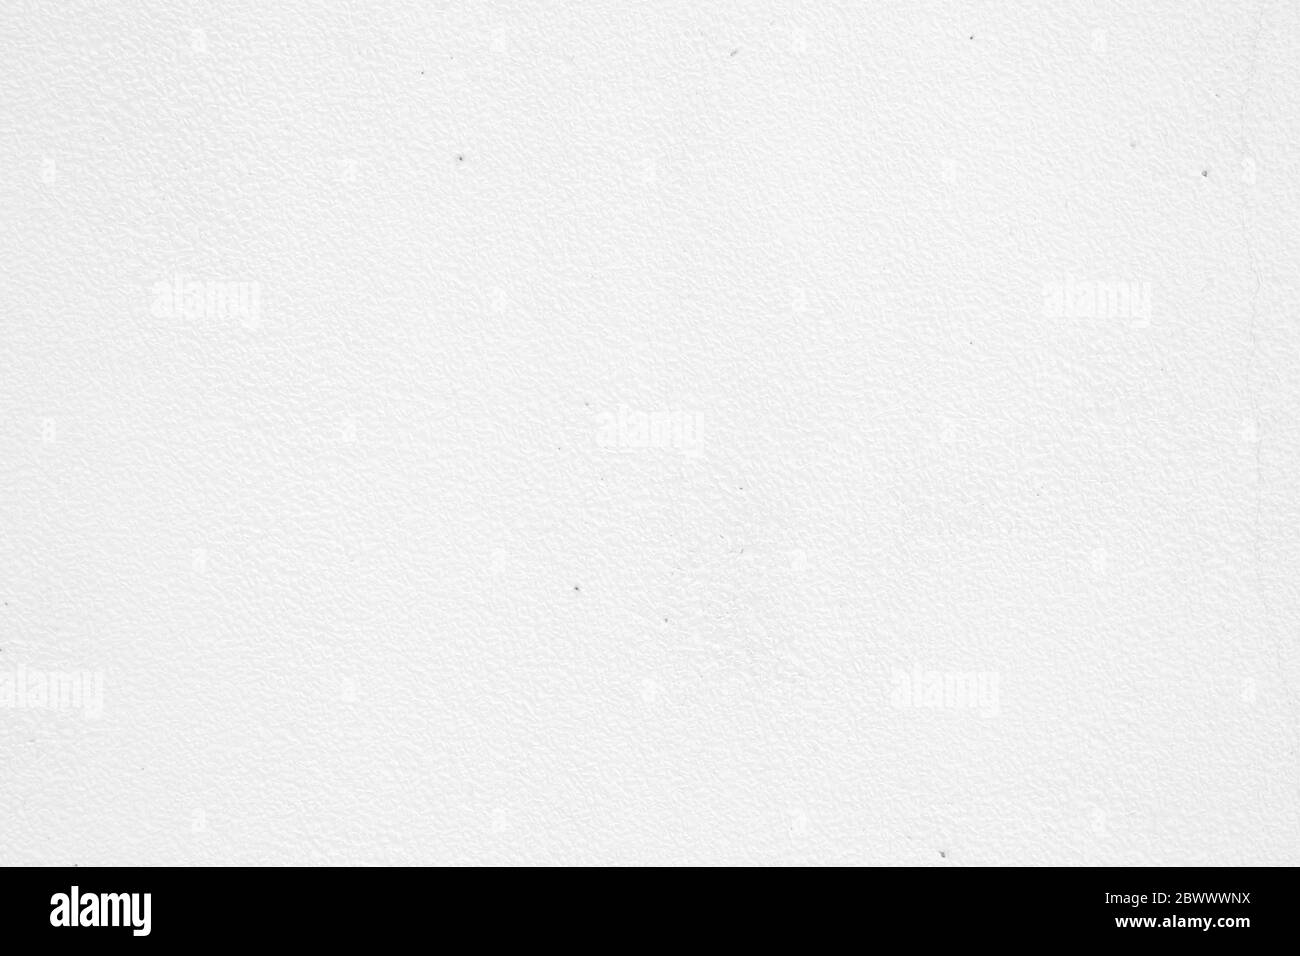 White Painting on Sand Wall Texture Background. Stock Photo